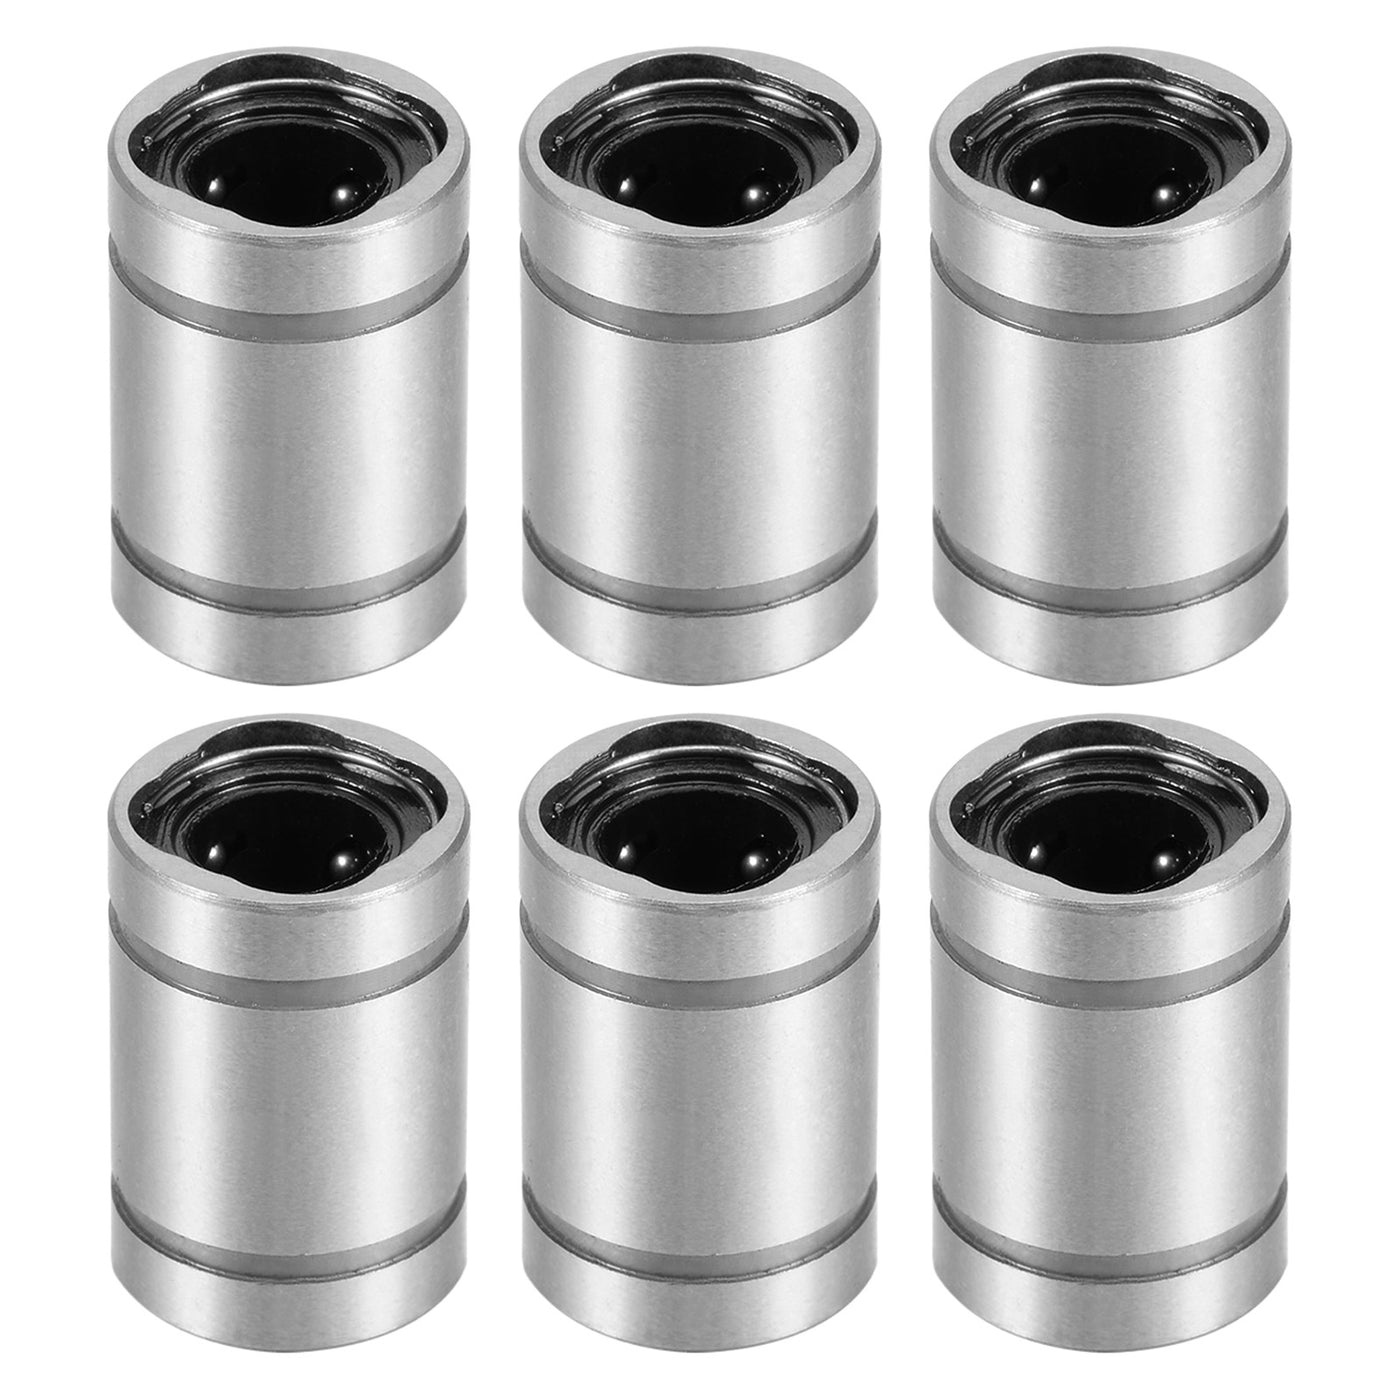 uxcell Uxcell 6pcs LM5UU Linear Ball Bearings, 5mm Bore 10mm OD 15mm Long Linear Bearing for CNC, 3D Printer